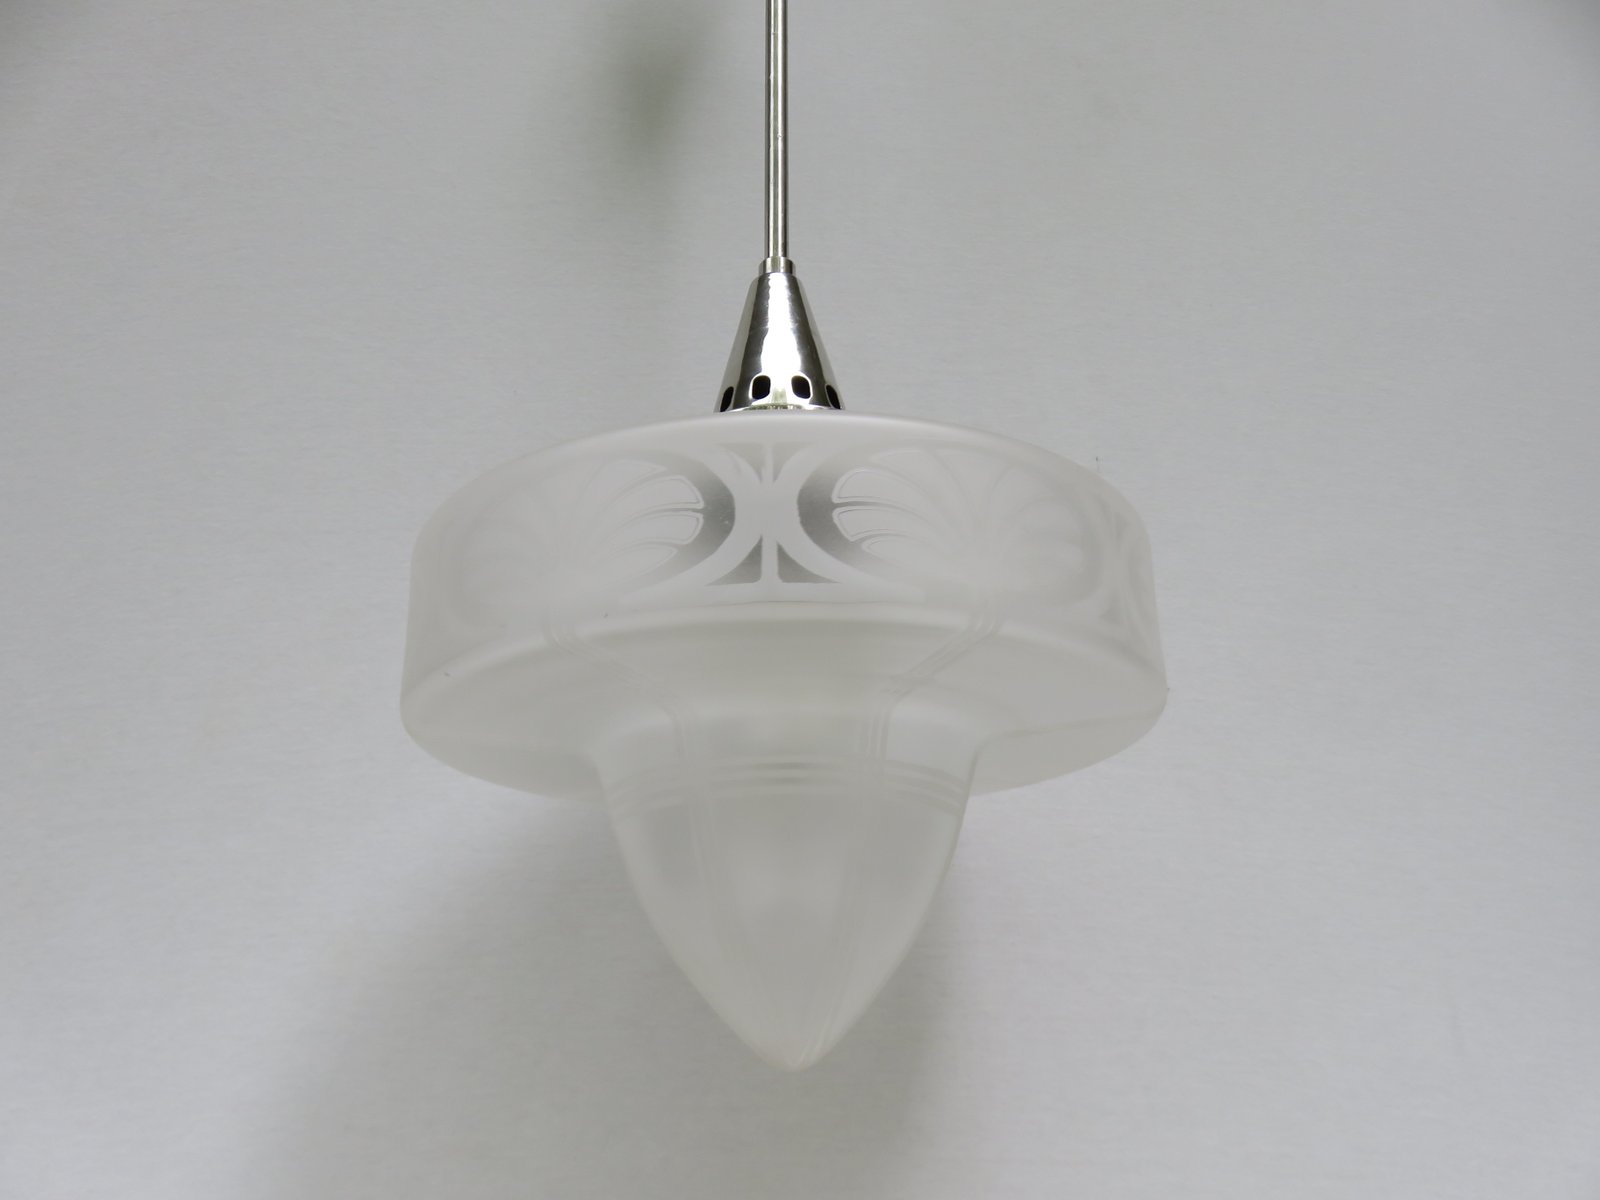 Vintage Art Deco Frosted Glass Ceiling Light for sale at Pamono